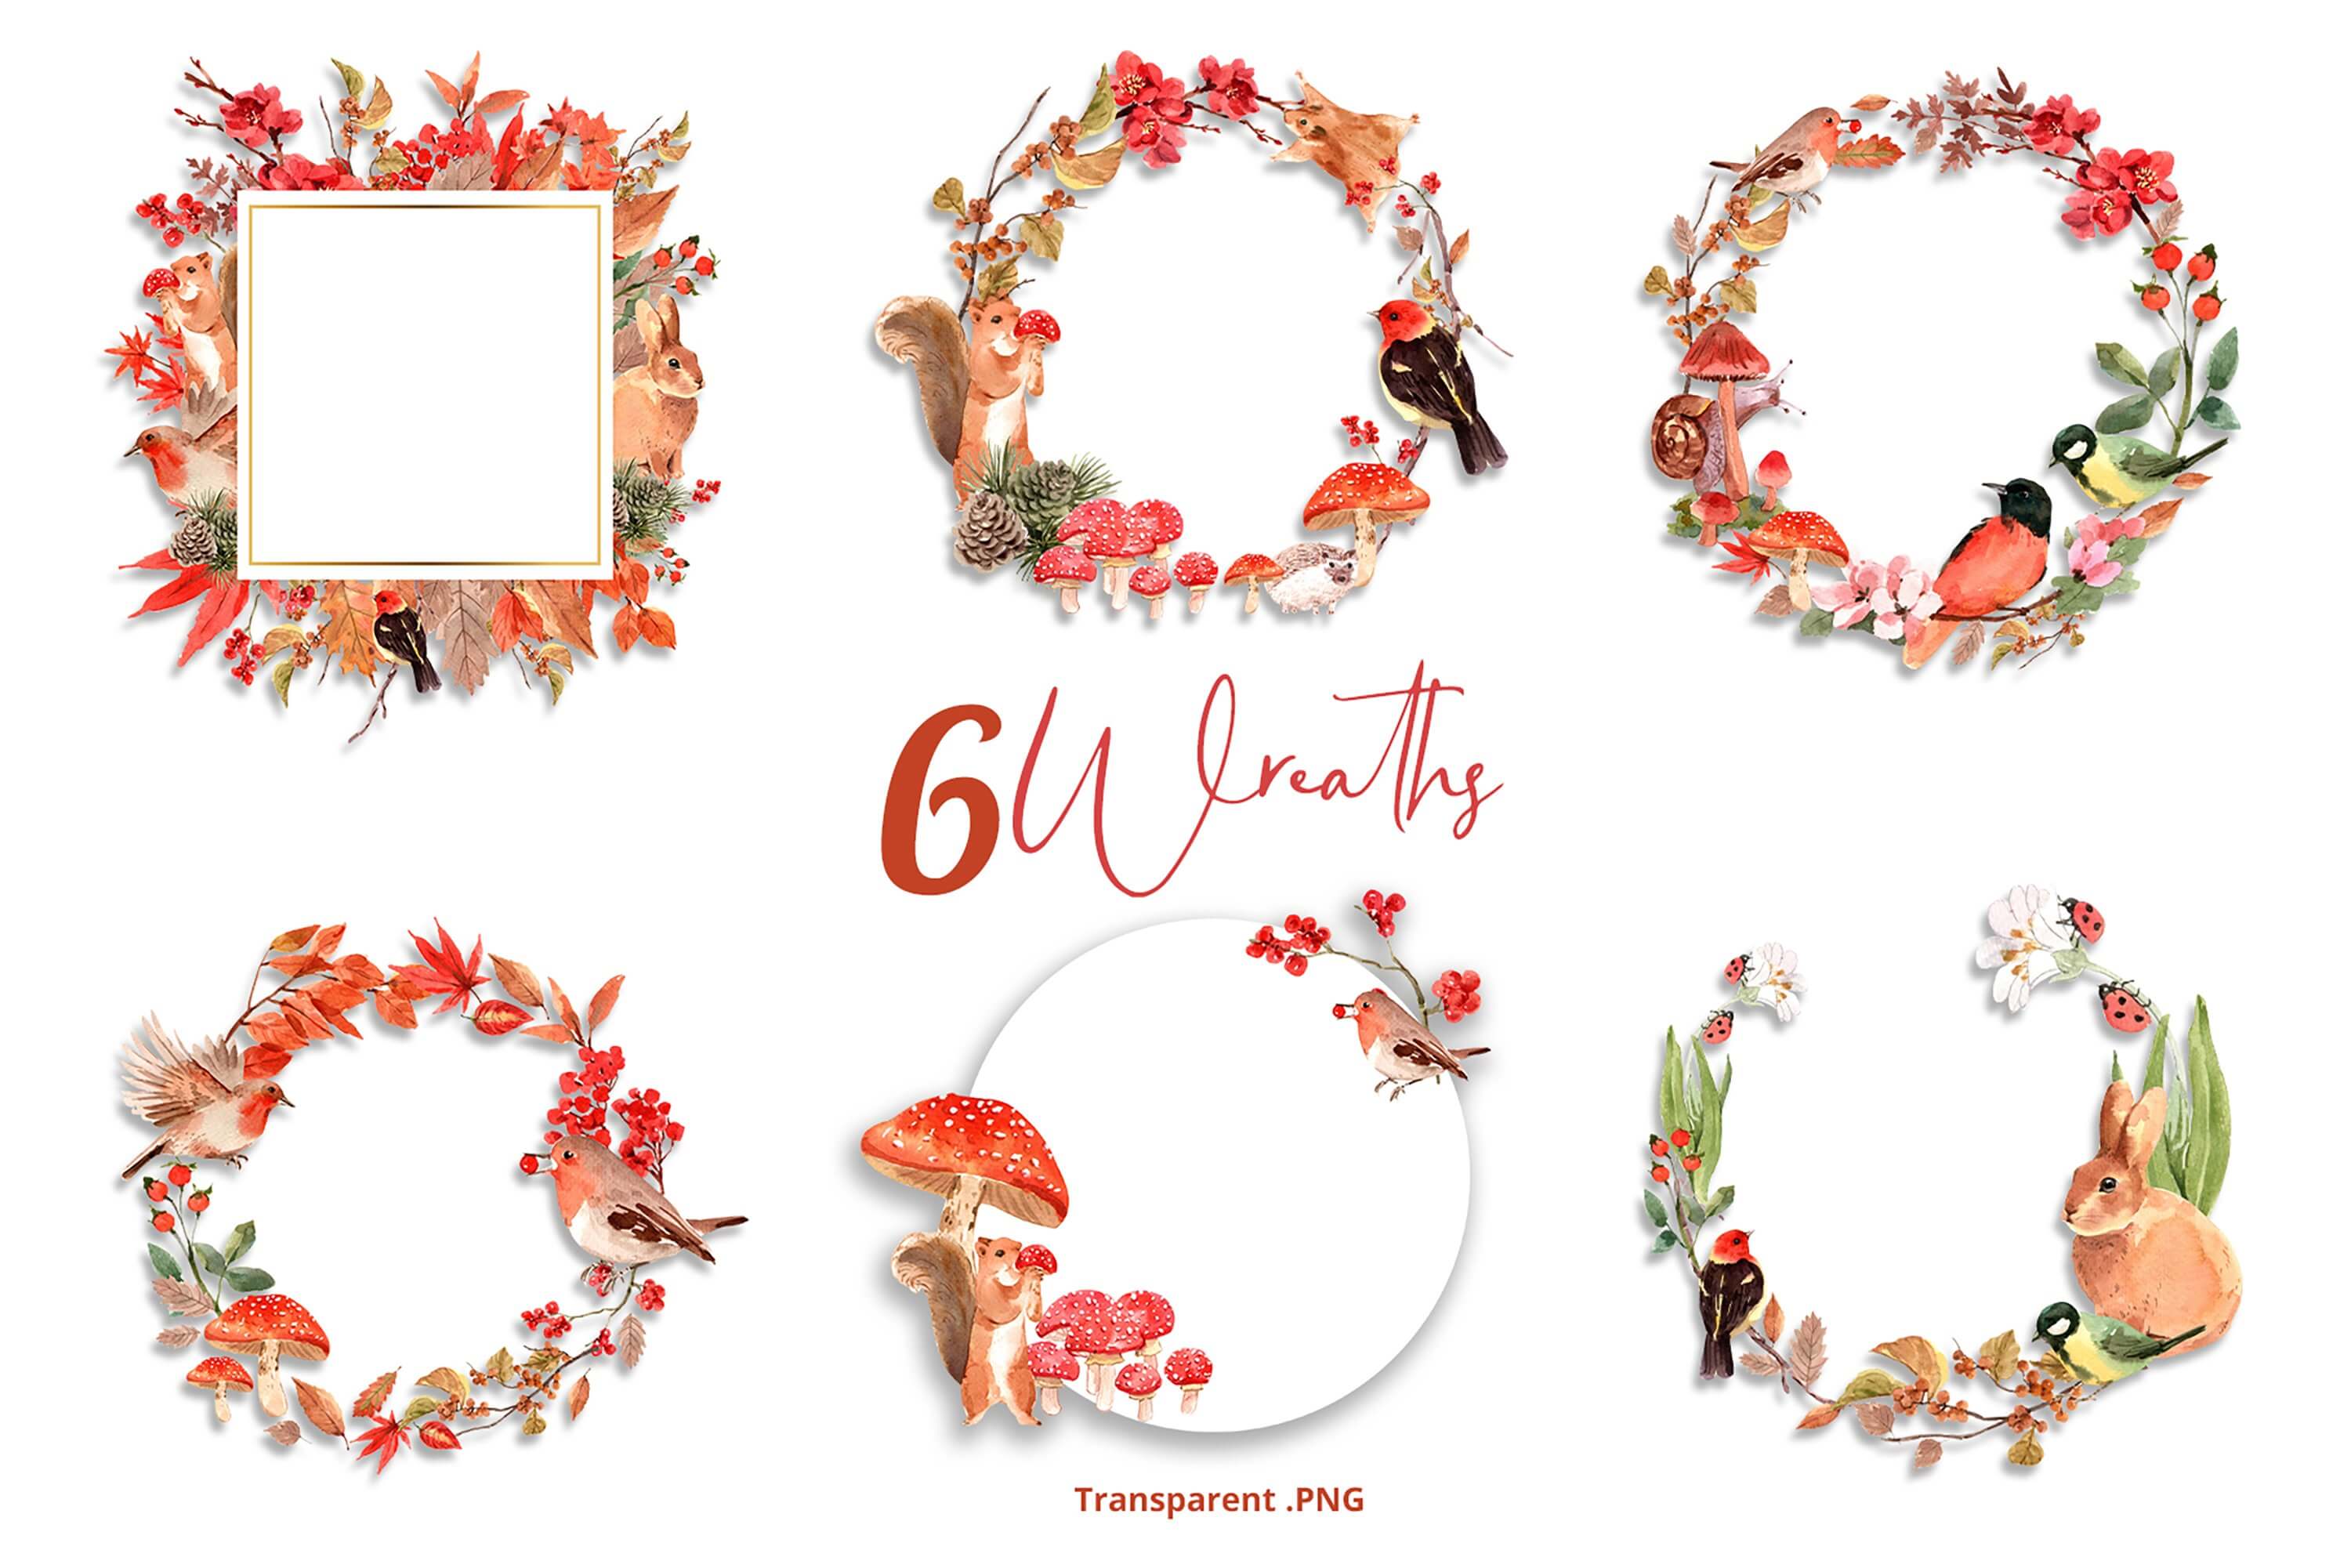 6 autumn wreaths of leaves, mushrooms, birds, squirrels, hares and ladybugs.